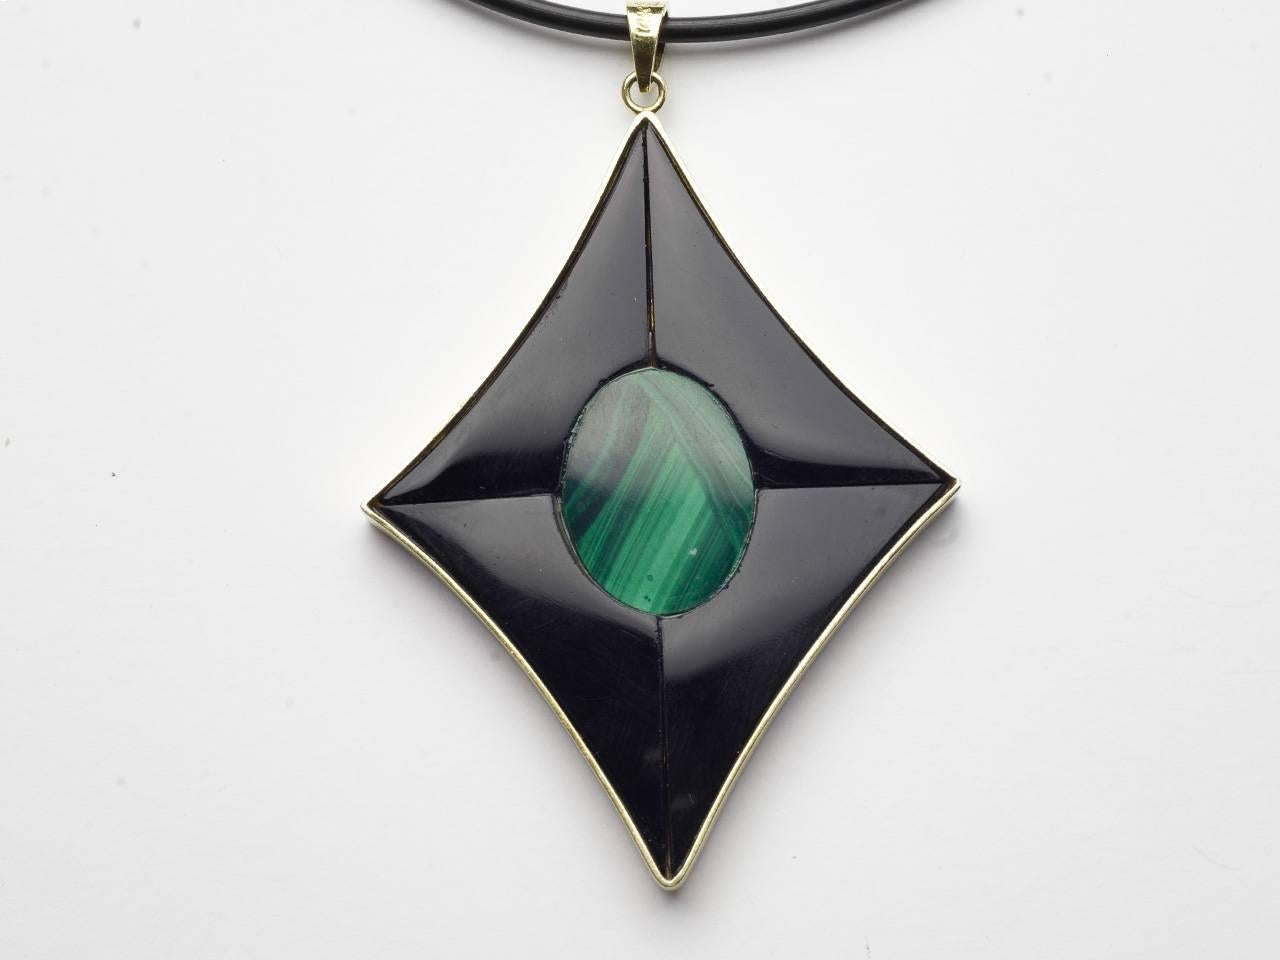 14kt gold pendant inset with coral on one side and malachite element on the other. Suspended on a silk cord. See additional photo. 14kt. 585.